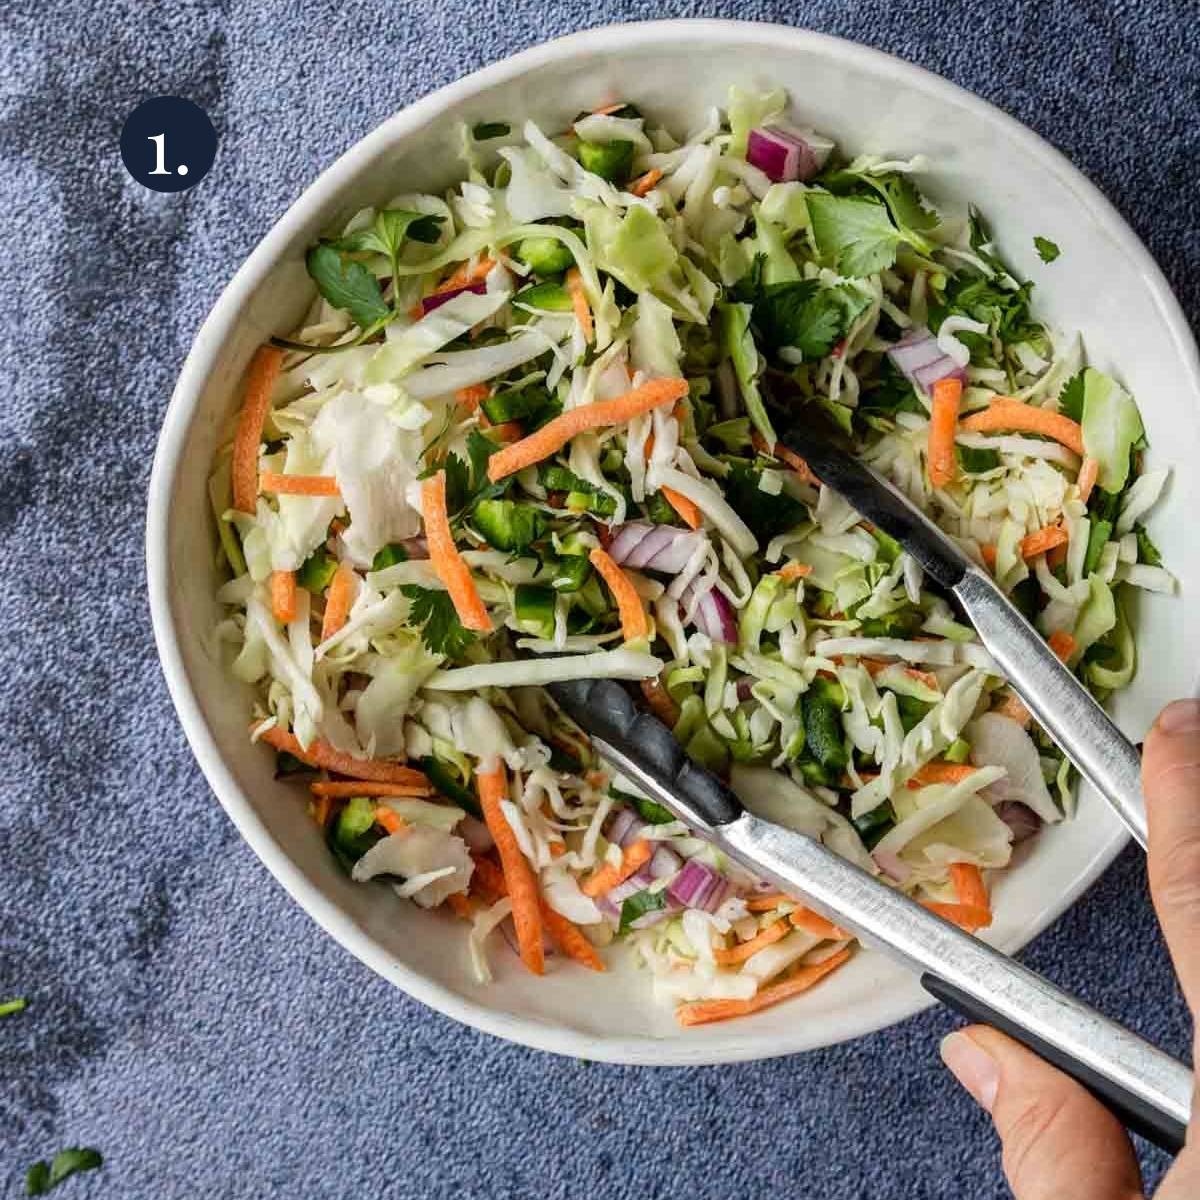 slaw being mixed in a bowl